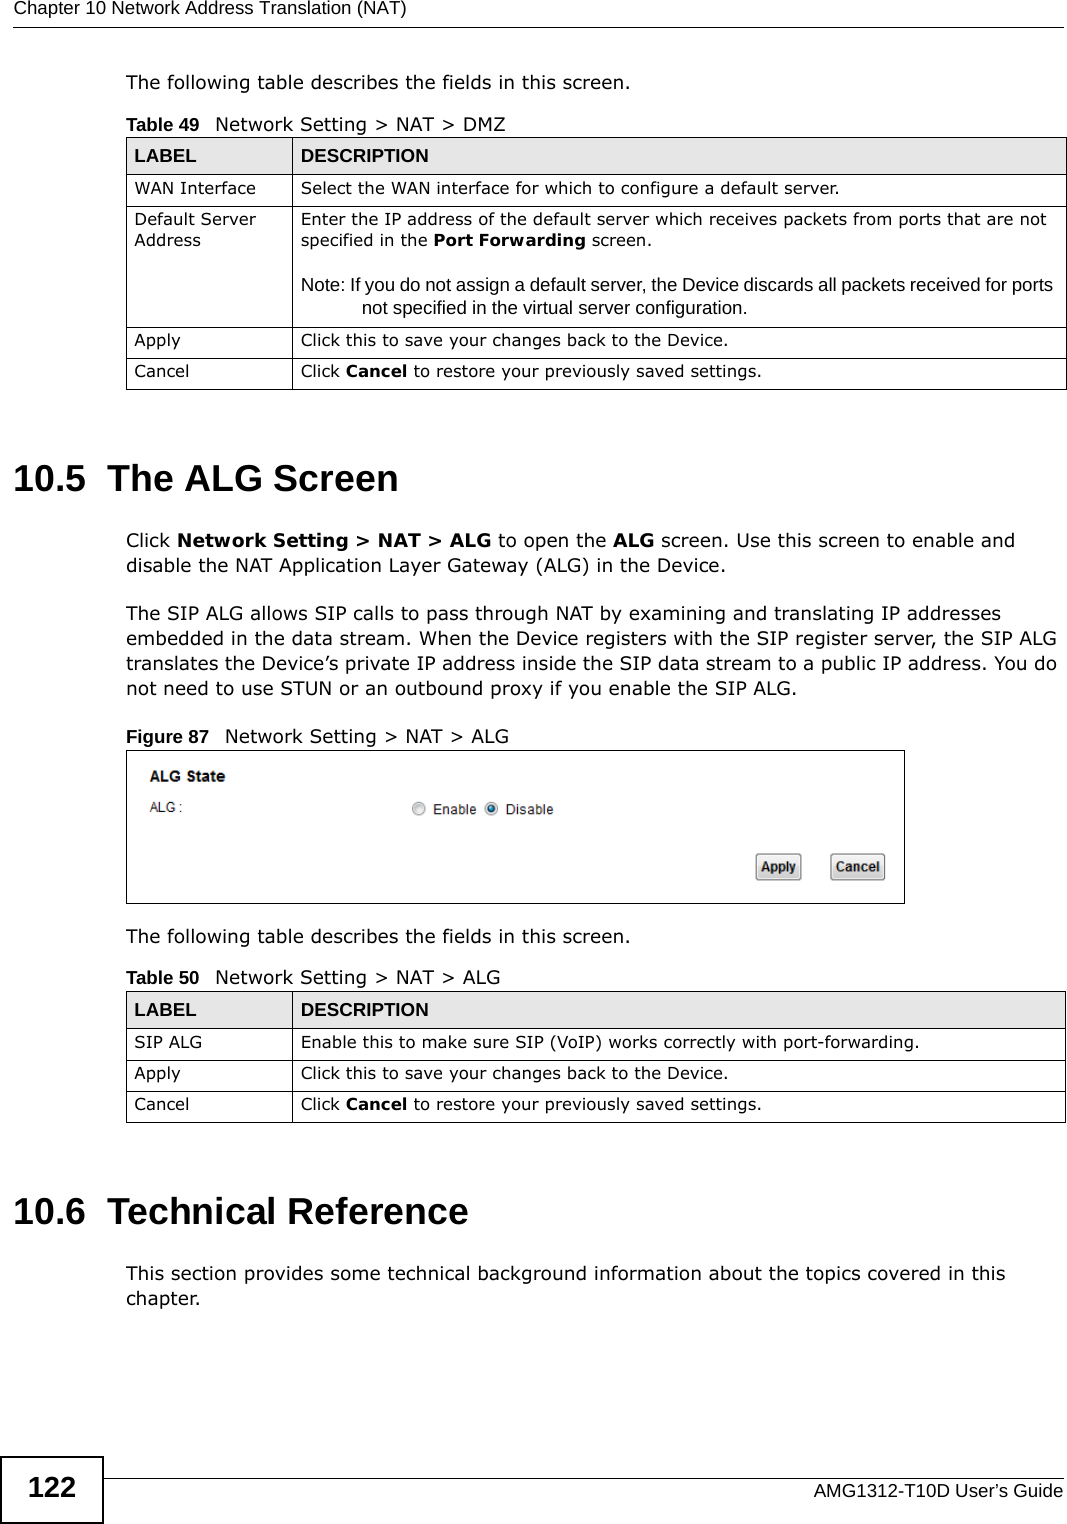 Chapter 10 Network Address Translation (NAT)AMG1312-T10D User’s Guide122The following table describes the fields in this screen. 10.5  The ALG ScreenClick Network Setting &gt; NAT &gt; ALG to open the ALG screen. Use this screen to enable and disable the NAT Application Layer Gateway (ALG) in the Device. The SIP ALG allows SIP calls to pass through NAT by examining and translating IP addresses embedded in the data stream. When the Device registers with the SIP register server, the SIP ALG translates the Device’s private IP address inside the SIP data stream to a public IP address. You do not need to use STUN or an outbound proxy if you enable the SIP ALG.Figure 87   Network Setting &gt; NAT &gt; ALG The following table describes the fields in this screen. 10.6  Technical ReferenceThis section provides some technical background information about the topics covered in this chapter.Table 49   Network Setting &gt; NAT &gt; DMZLABEL DESCRIPTIONWAN Interface Select the WAN interface for which to configure a default server.Default Server AddressEnter the IP address of the default server which receives packets from ports that are not specified in the Port Forwarding screen. Note: If you do not assign a default server, the Device discards all packets received for ports not specified in the virtual server configuration.Apply Click this to save your changes back to the Device.Cancel Click Cancel to restore your previously saved settings.Table 50   Network Setting &gt; NAT &gt; ALGLABEL DESCRIPTIONSIP ALG Enable this to make sure SIP (VoIP) works correctly with port-forwarding. Apply Click this to save your changes back to the Device.Cancel Click Cancel to restore your previously saved settings.